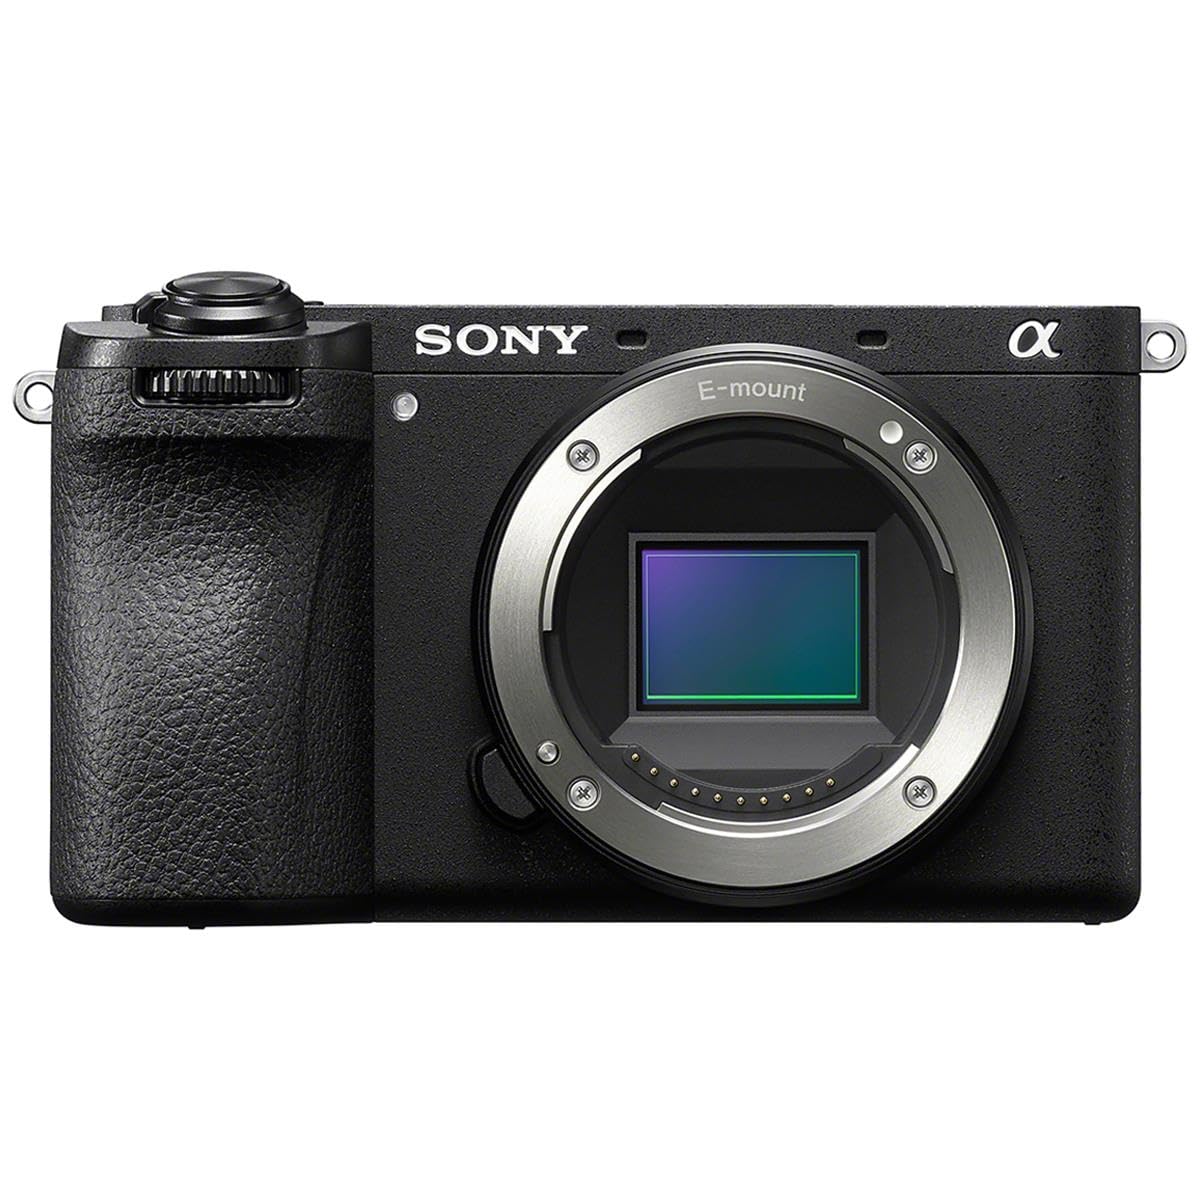 Sony Alpha a6700 Mirrorless Camera Body Bundle with Shoulder Bag, 128GB SD Card, Card Reader, Extra Battery, Charger